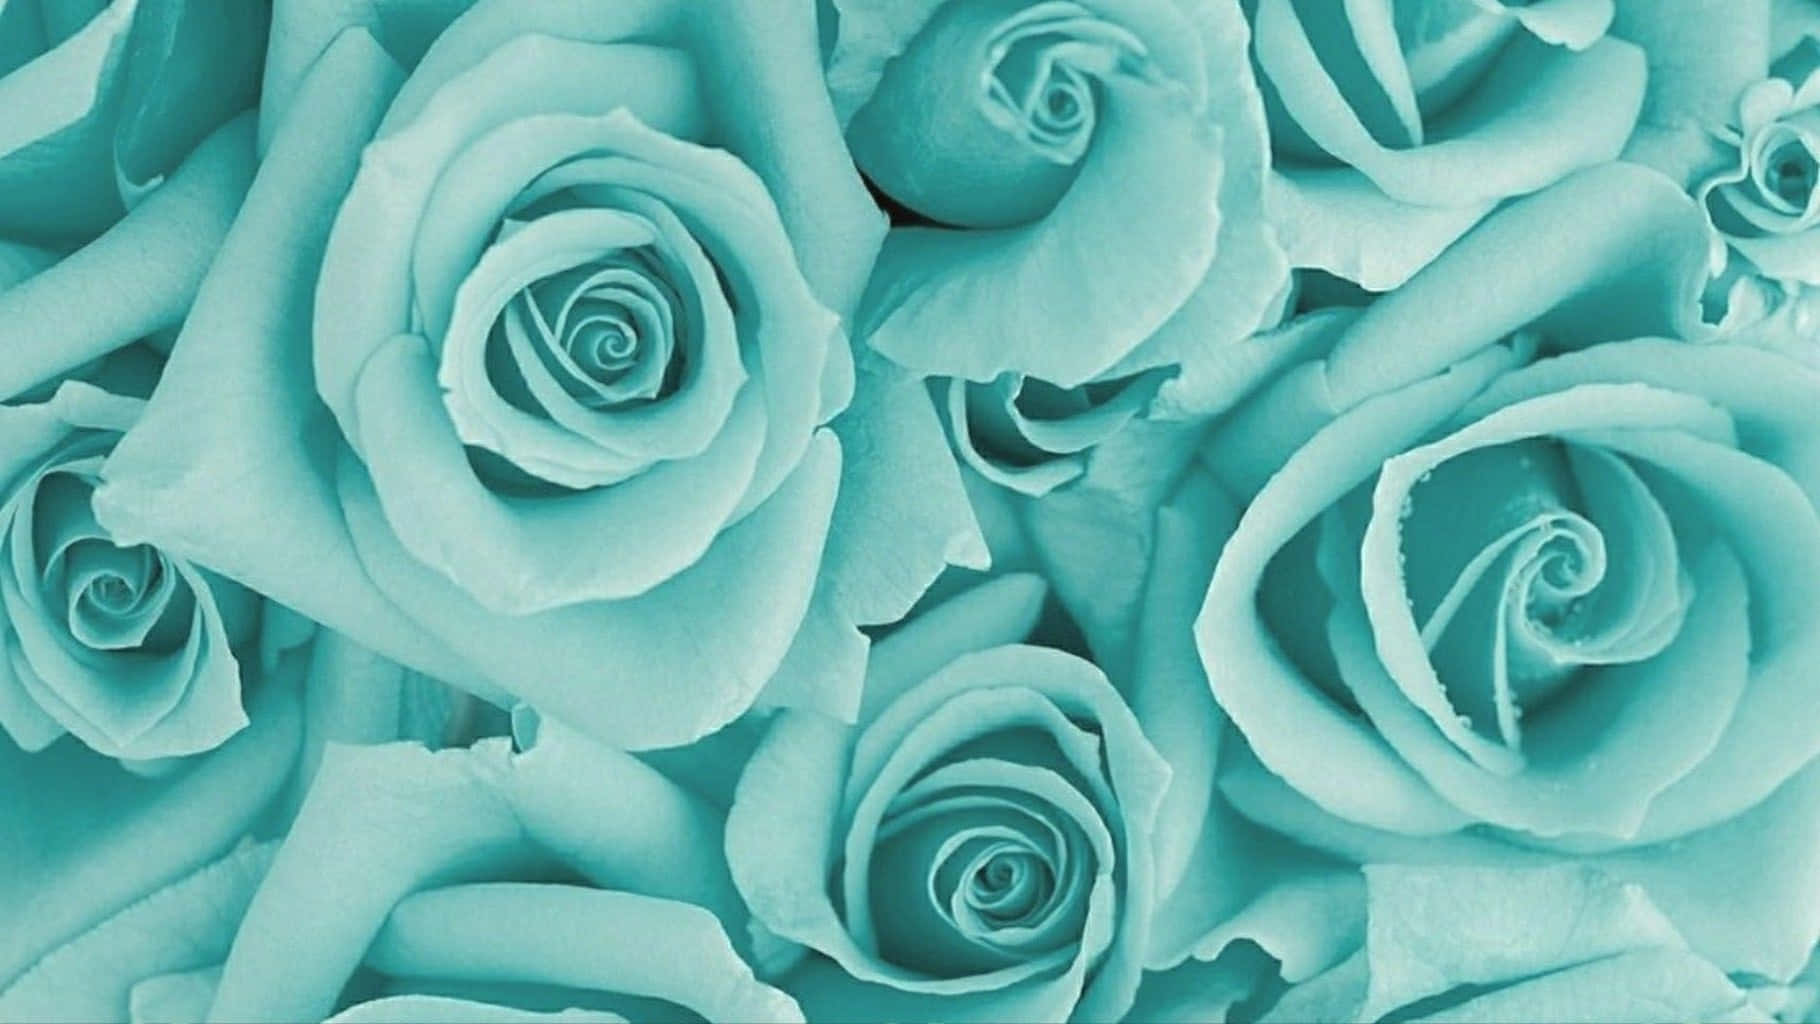 A close up of teal roses on a teal background. - Teal, aqua